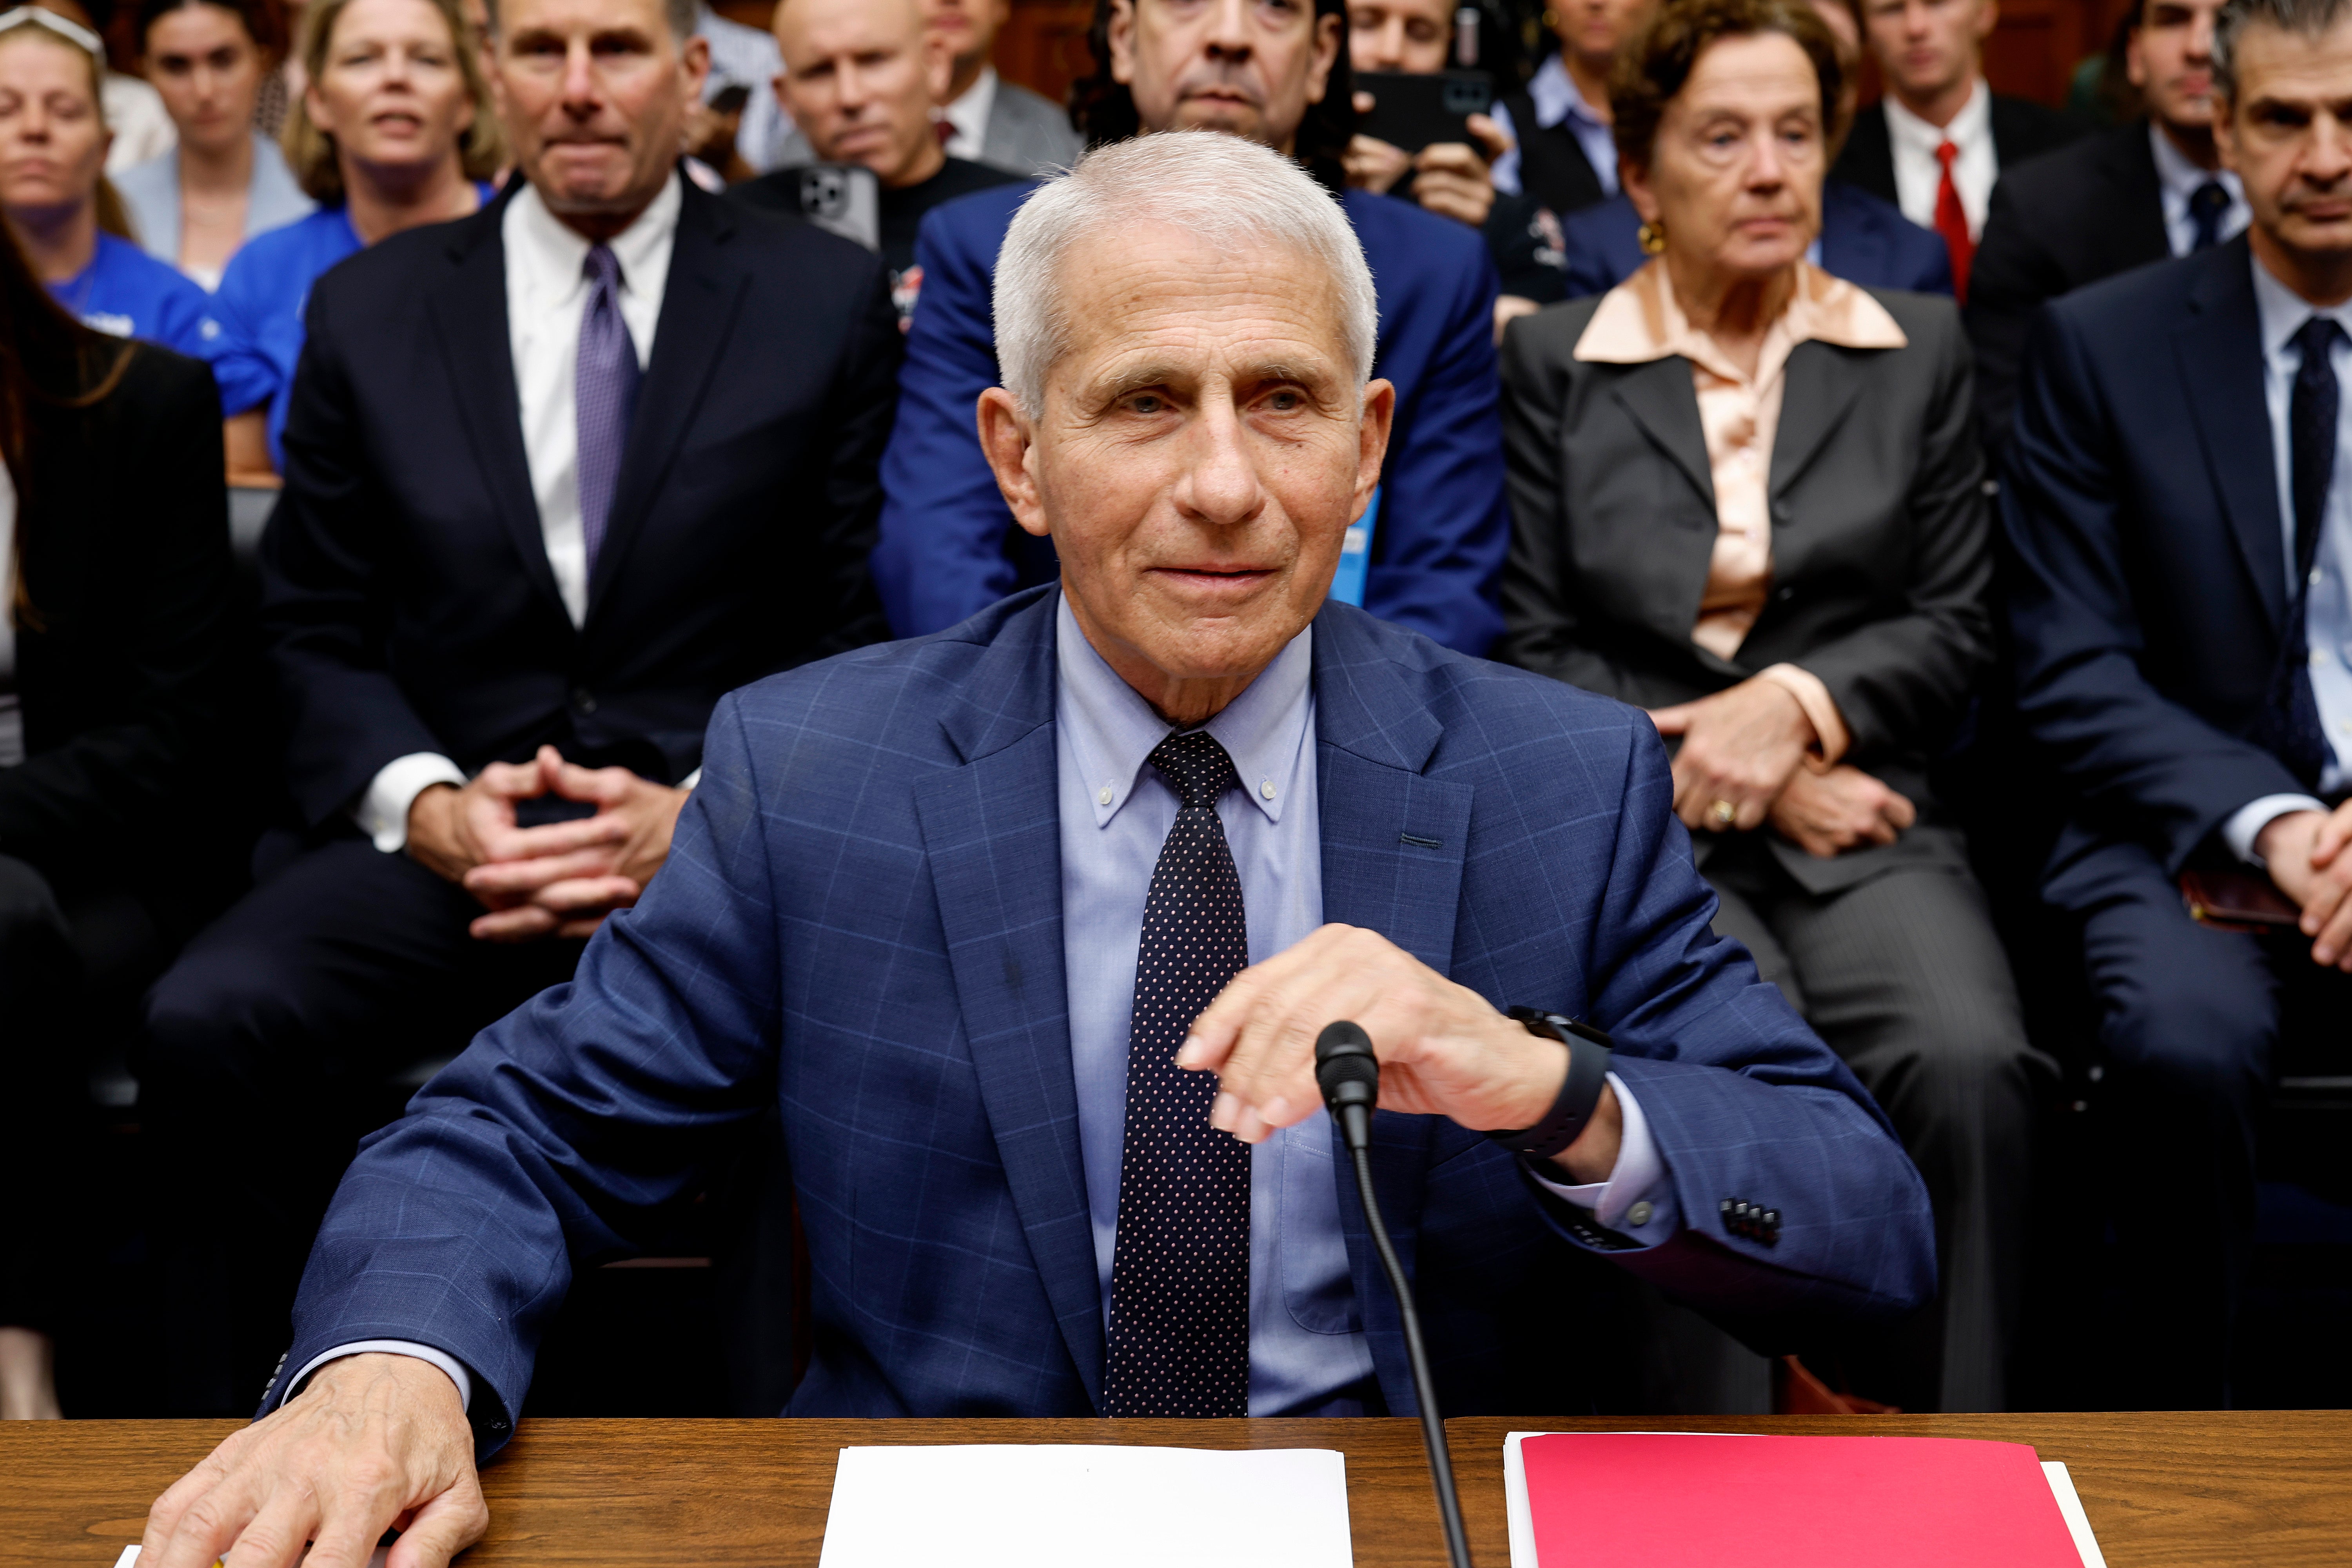 Dr. Anthony Fauci in blue suit and microphone at hearing with people shown in background.